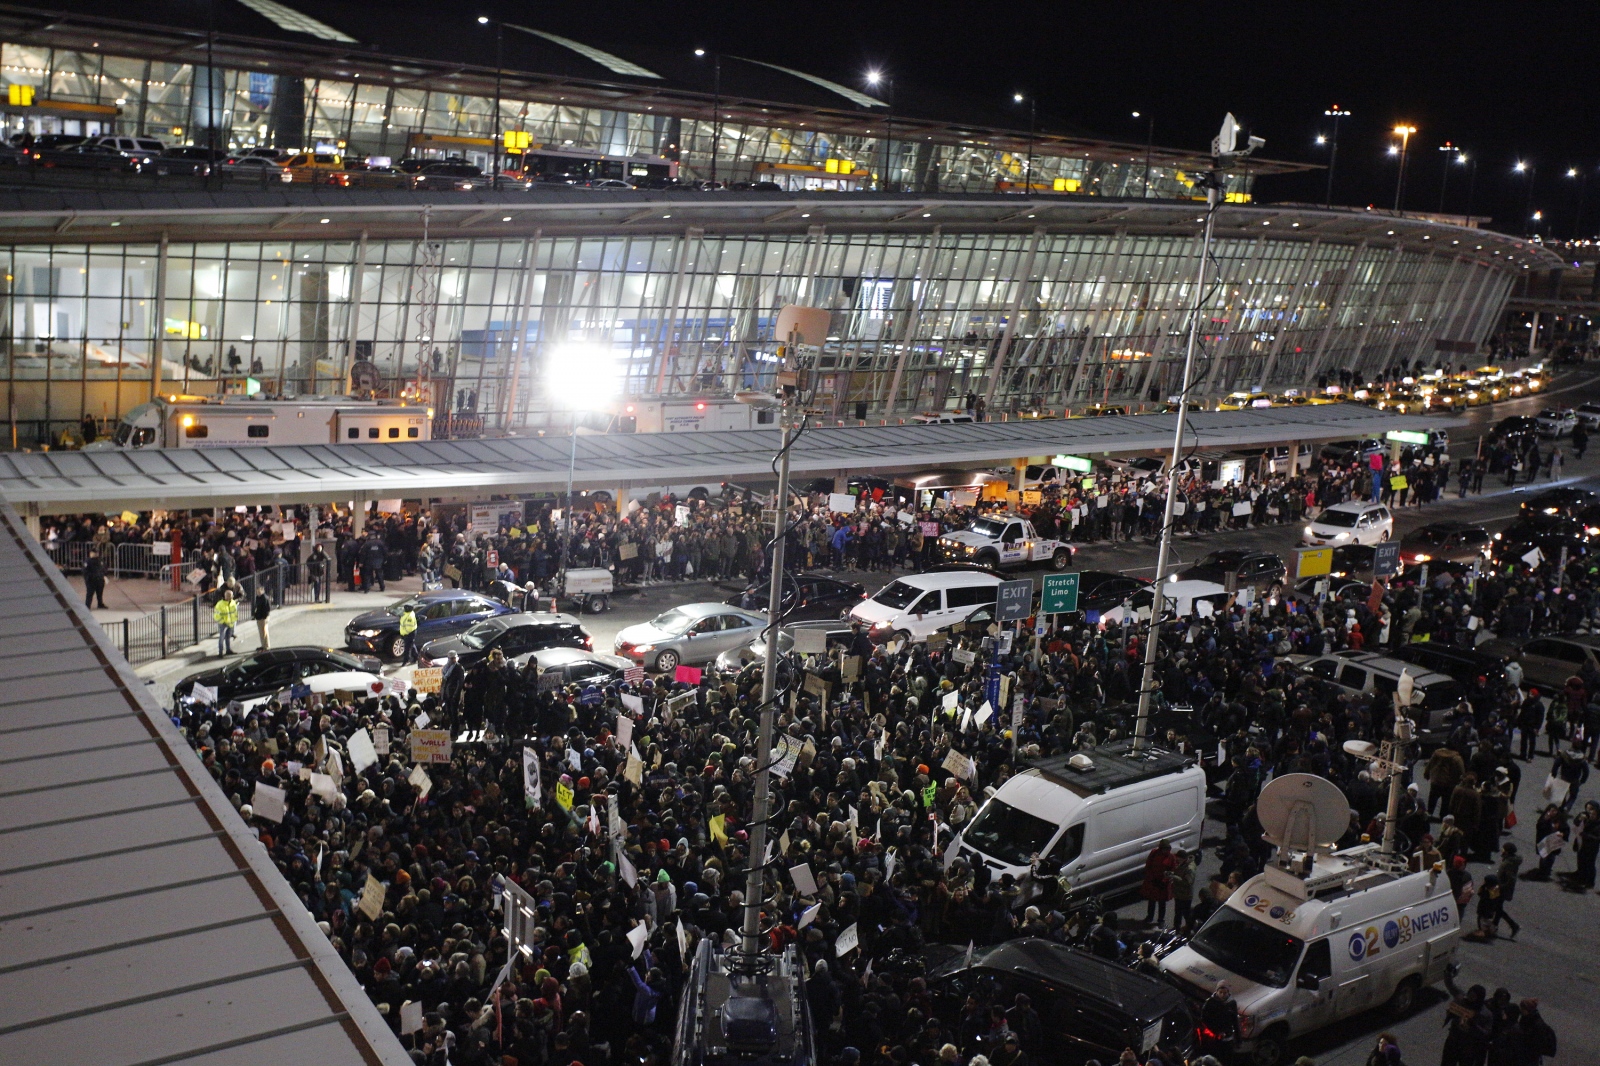 Image from Resisting Trumps' America  - Thousands of protesters came to JFK to protest...